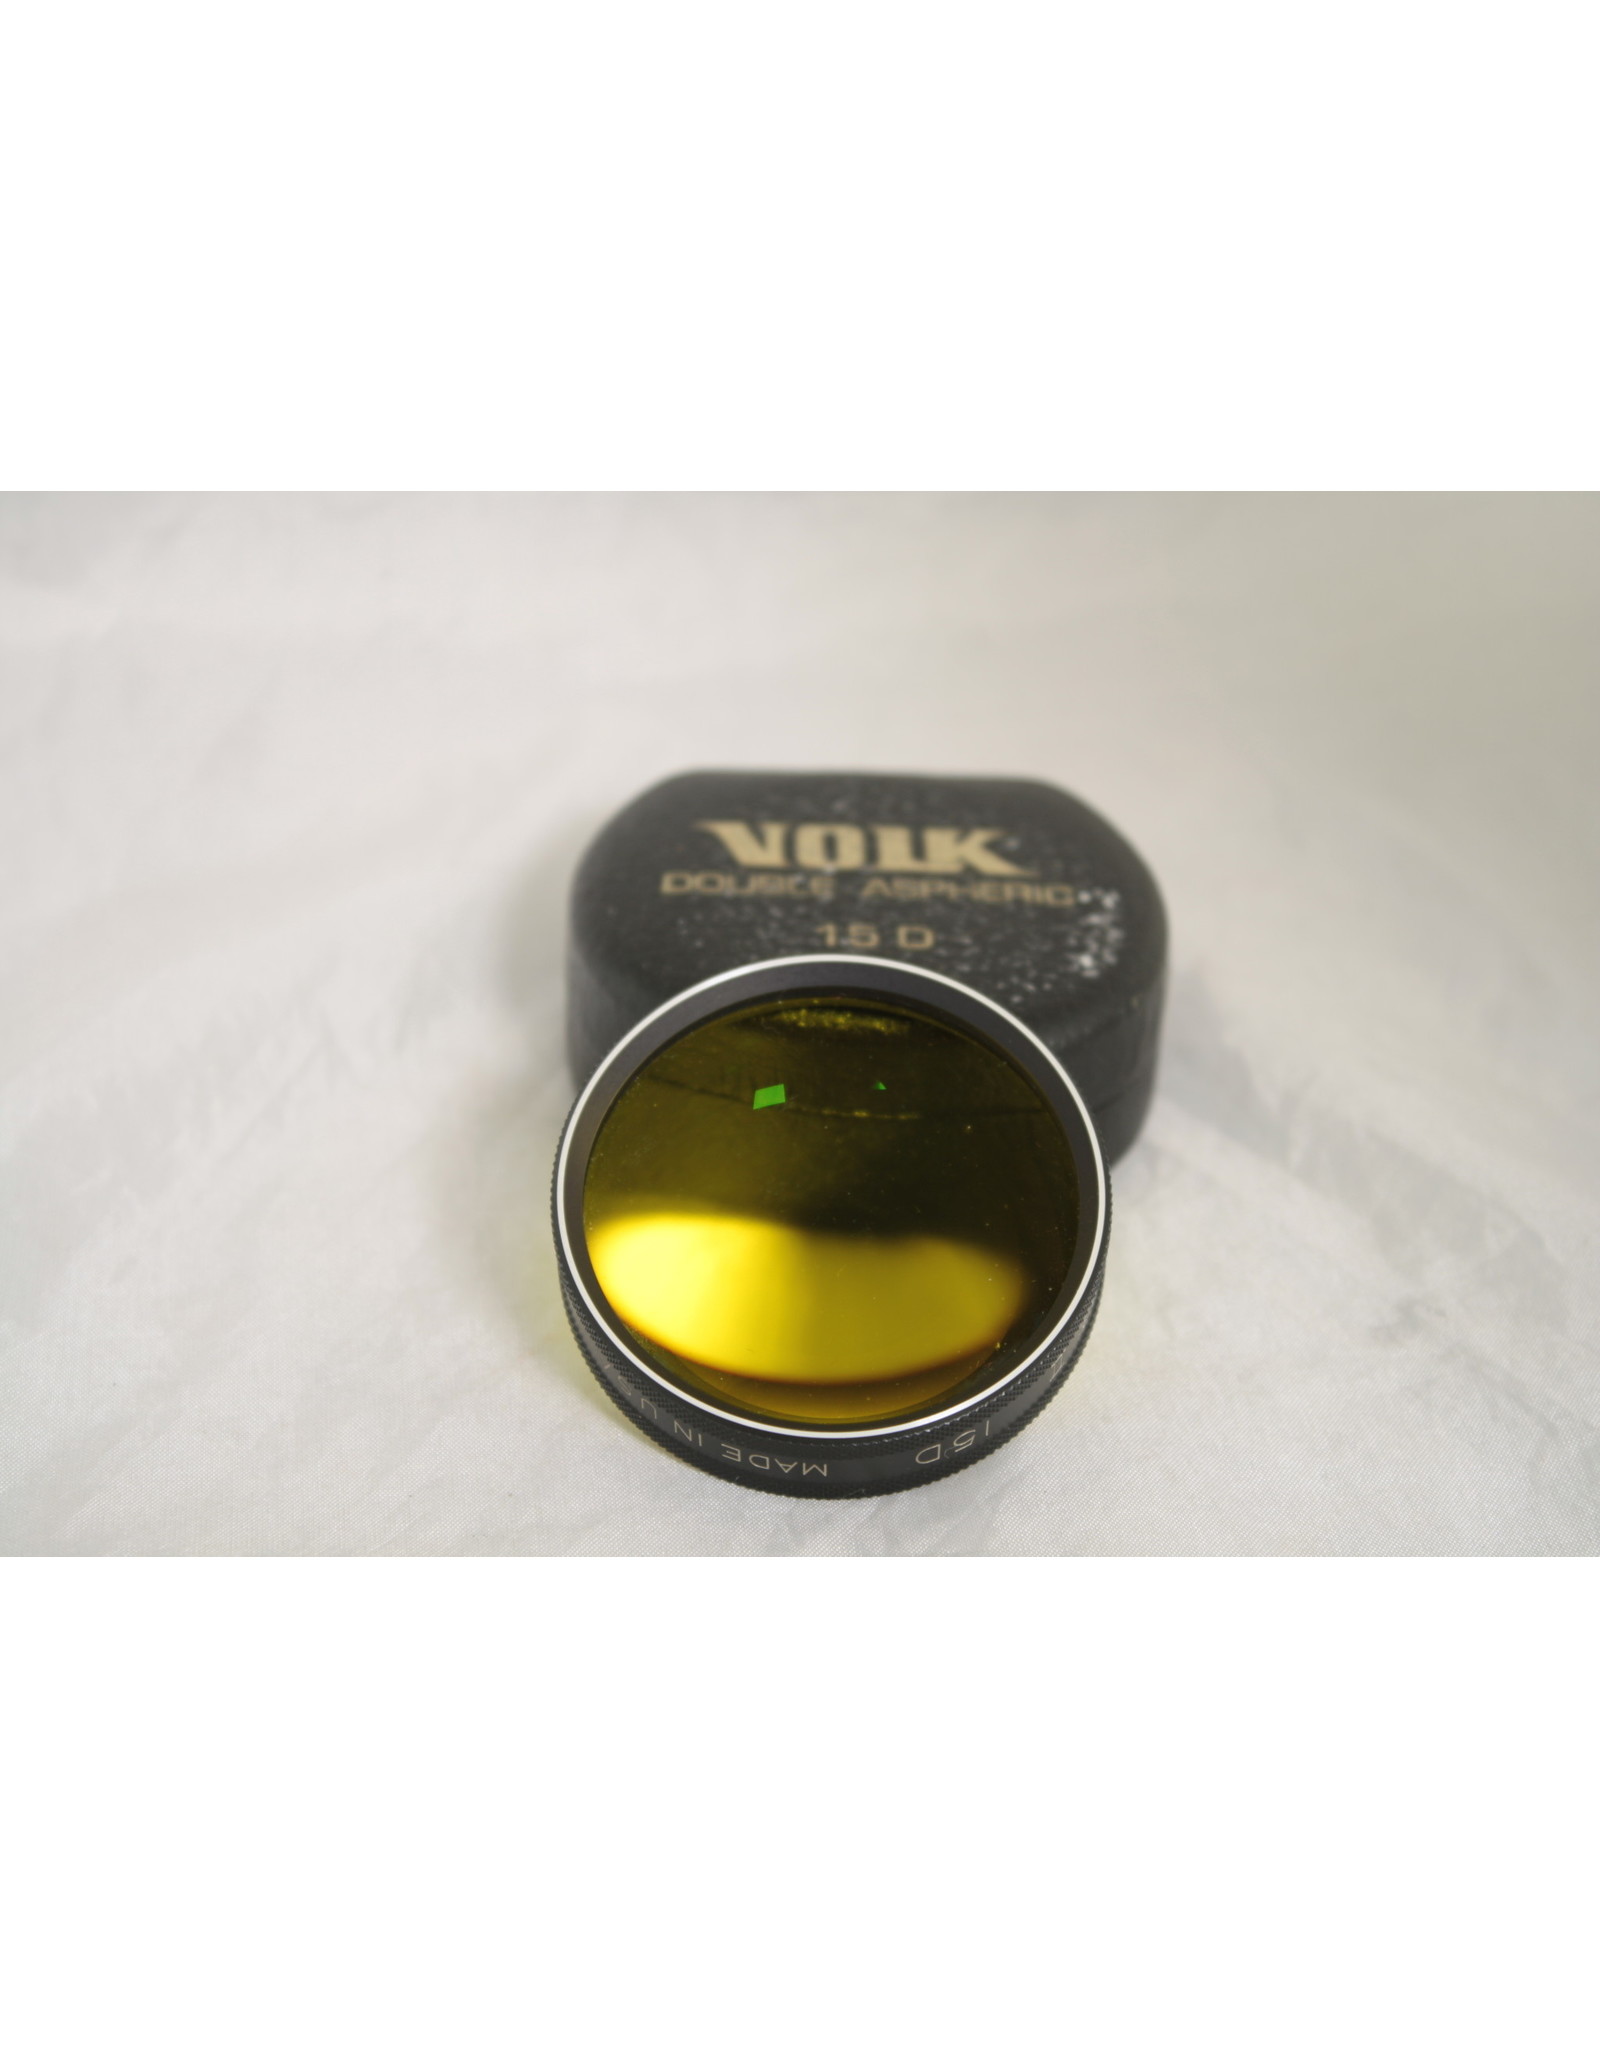 Nikon Volk 20D lens, Double Aspheric, Yellow Tinted, Perfect Condition, Made In USA.